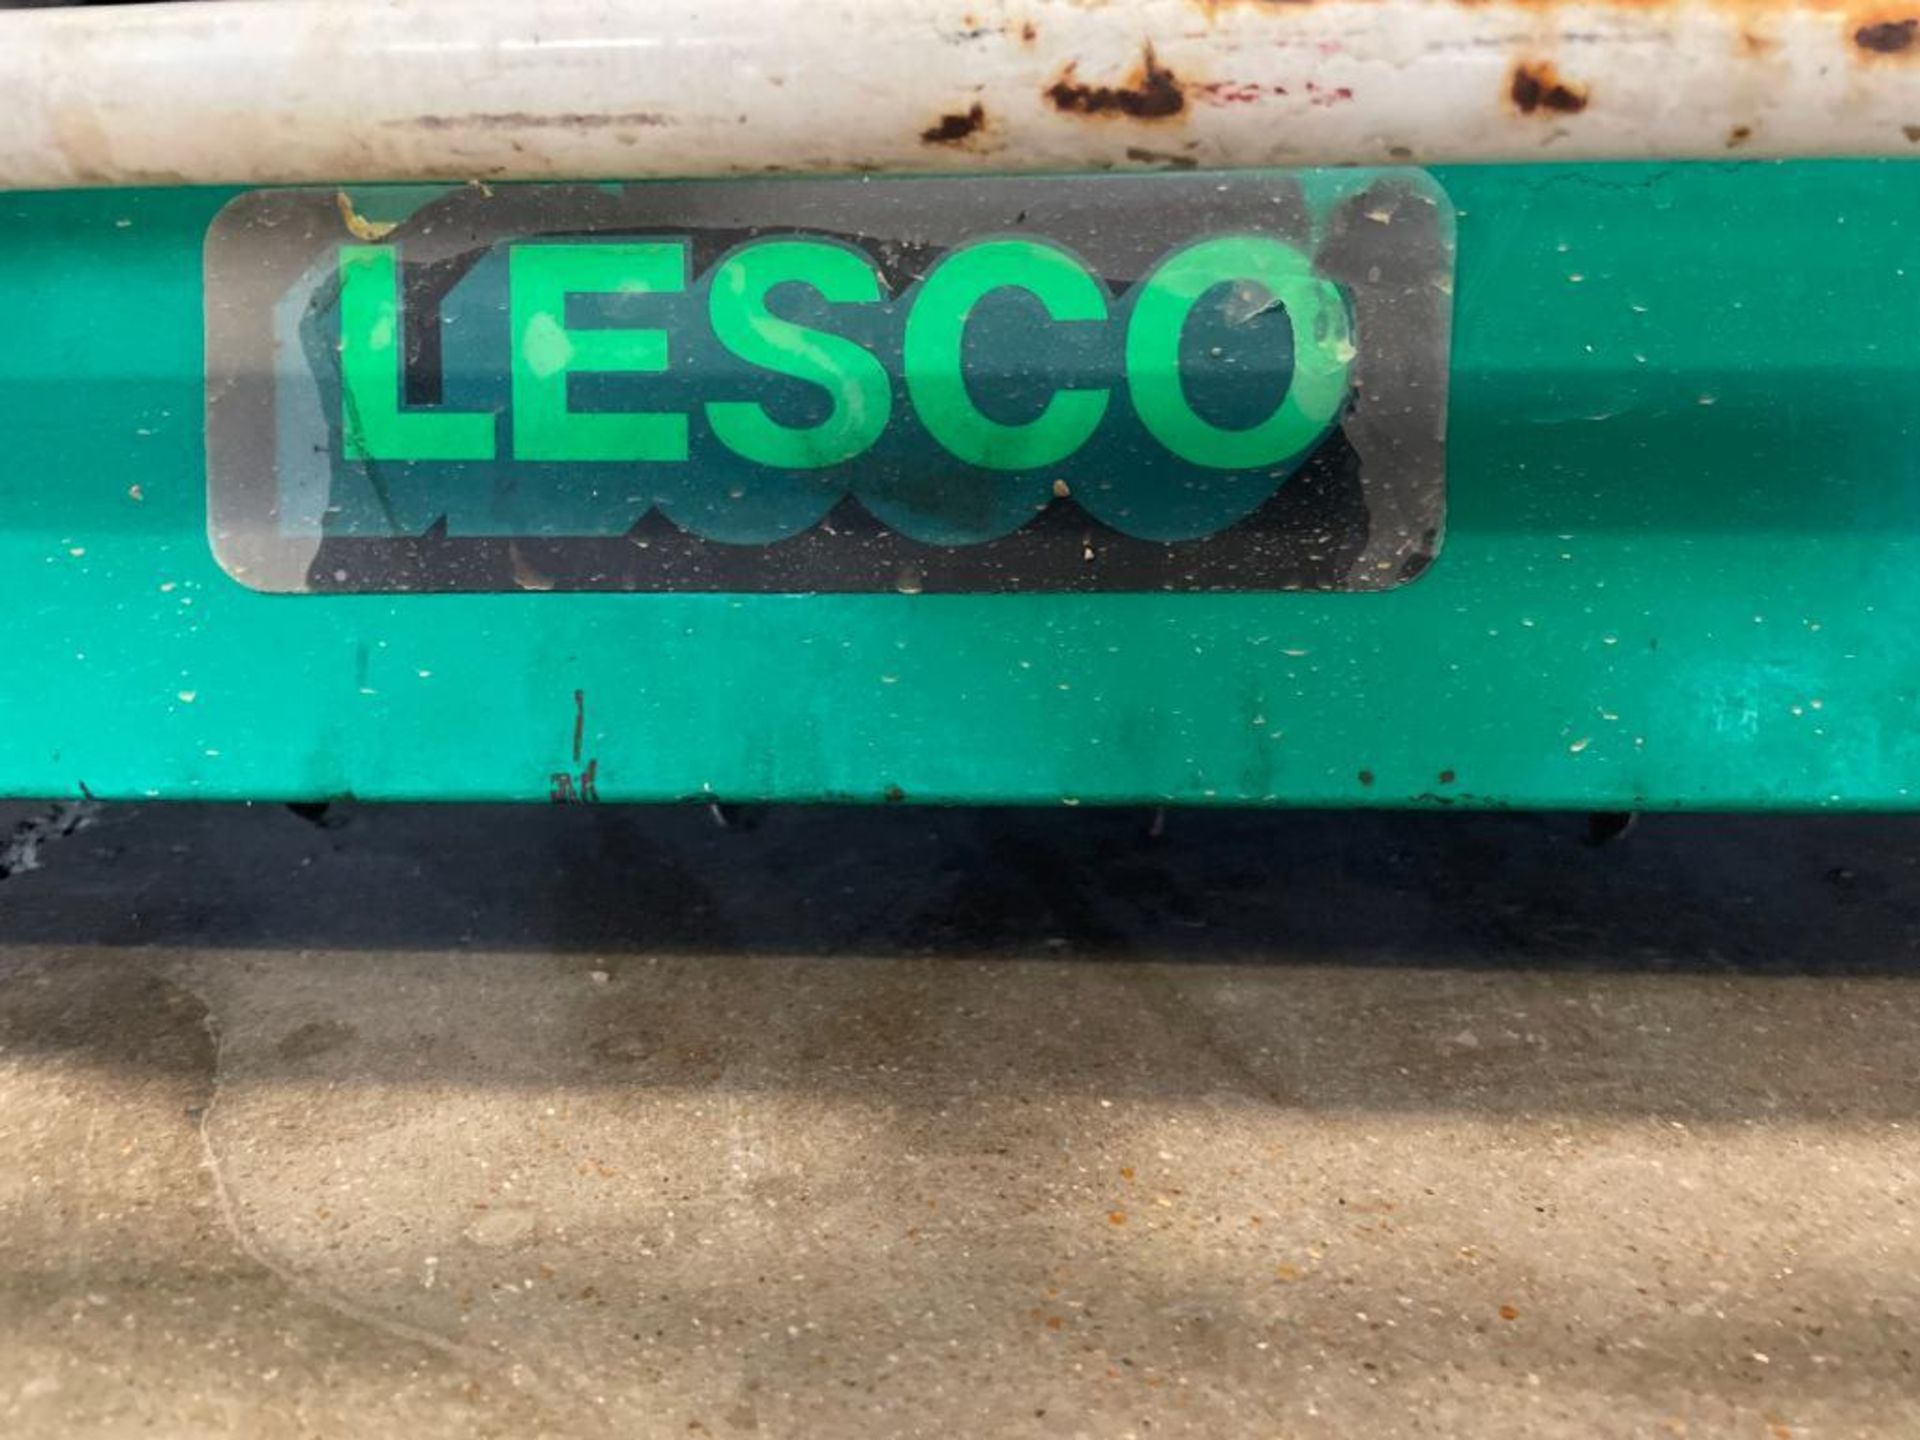 Lesco Lawn Sweeper. Located in Hazelwood, MO - Image 4 of 6